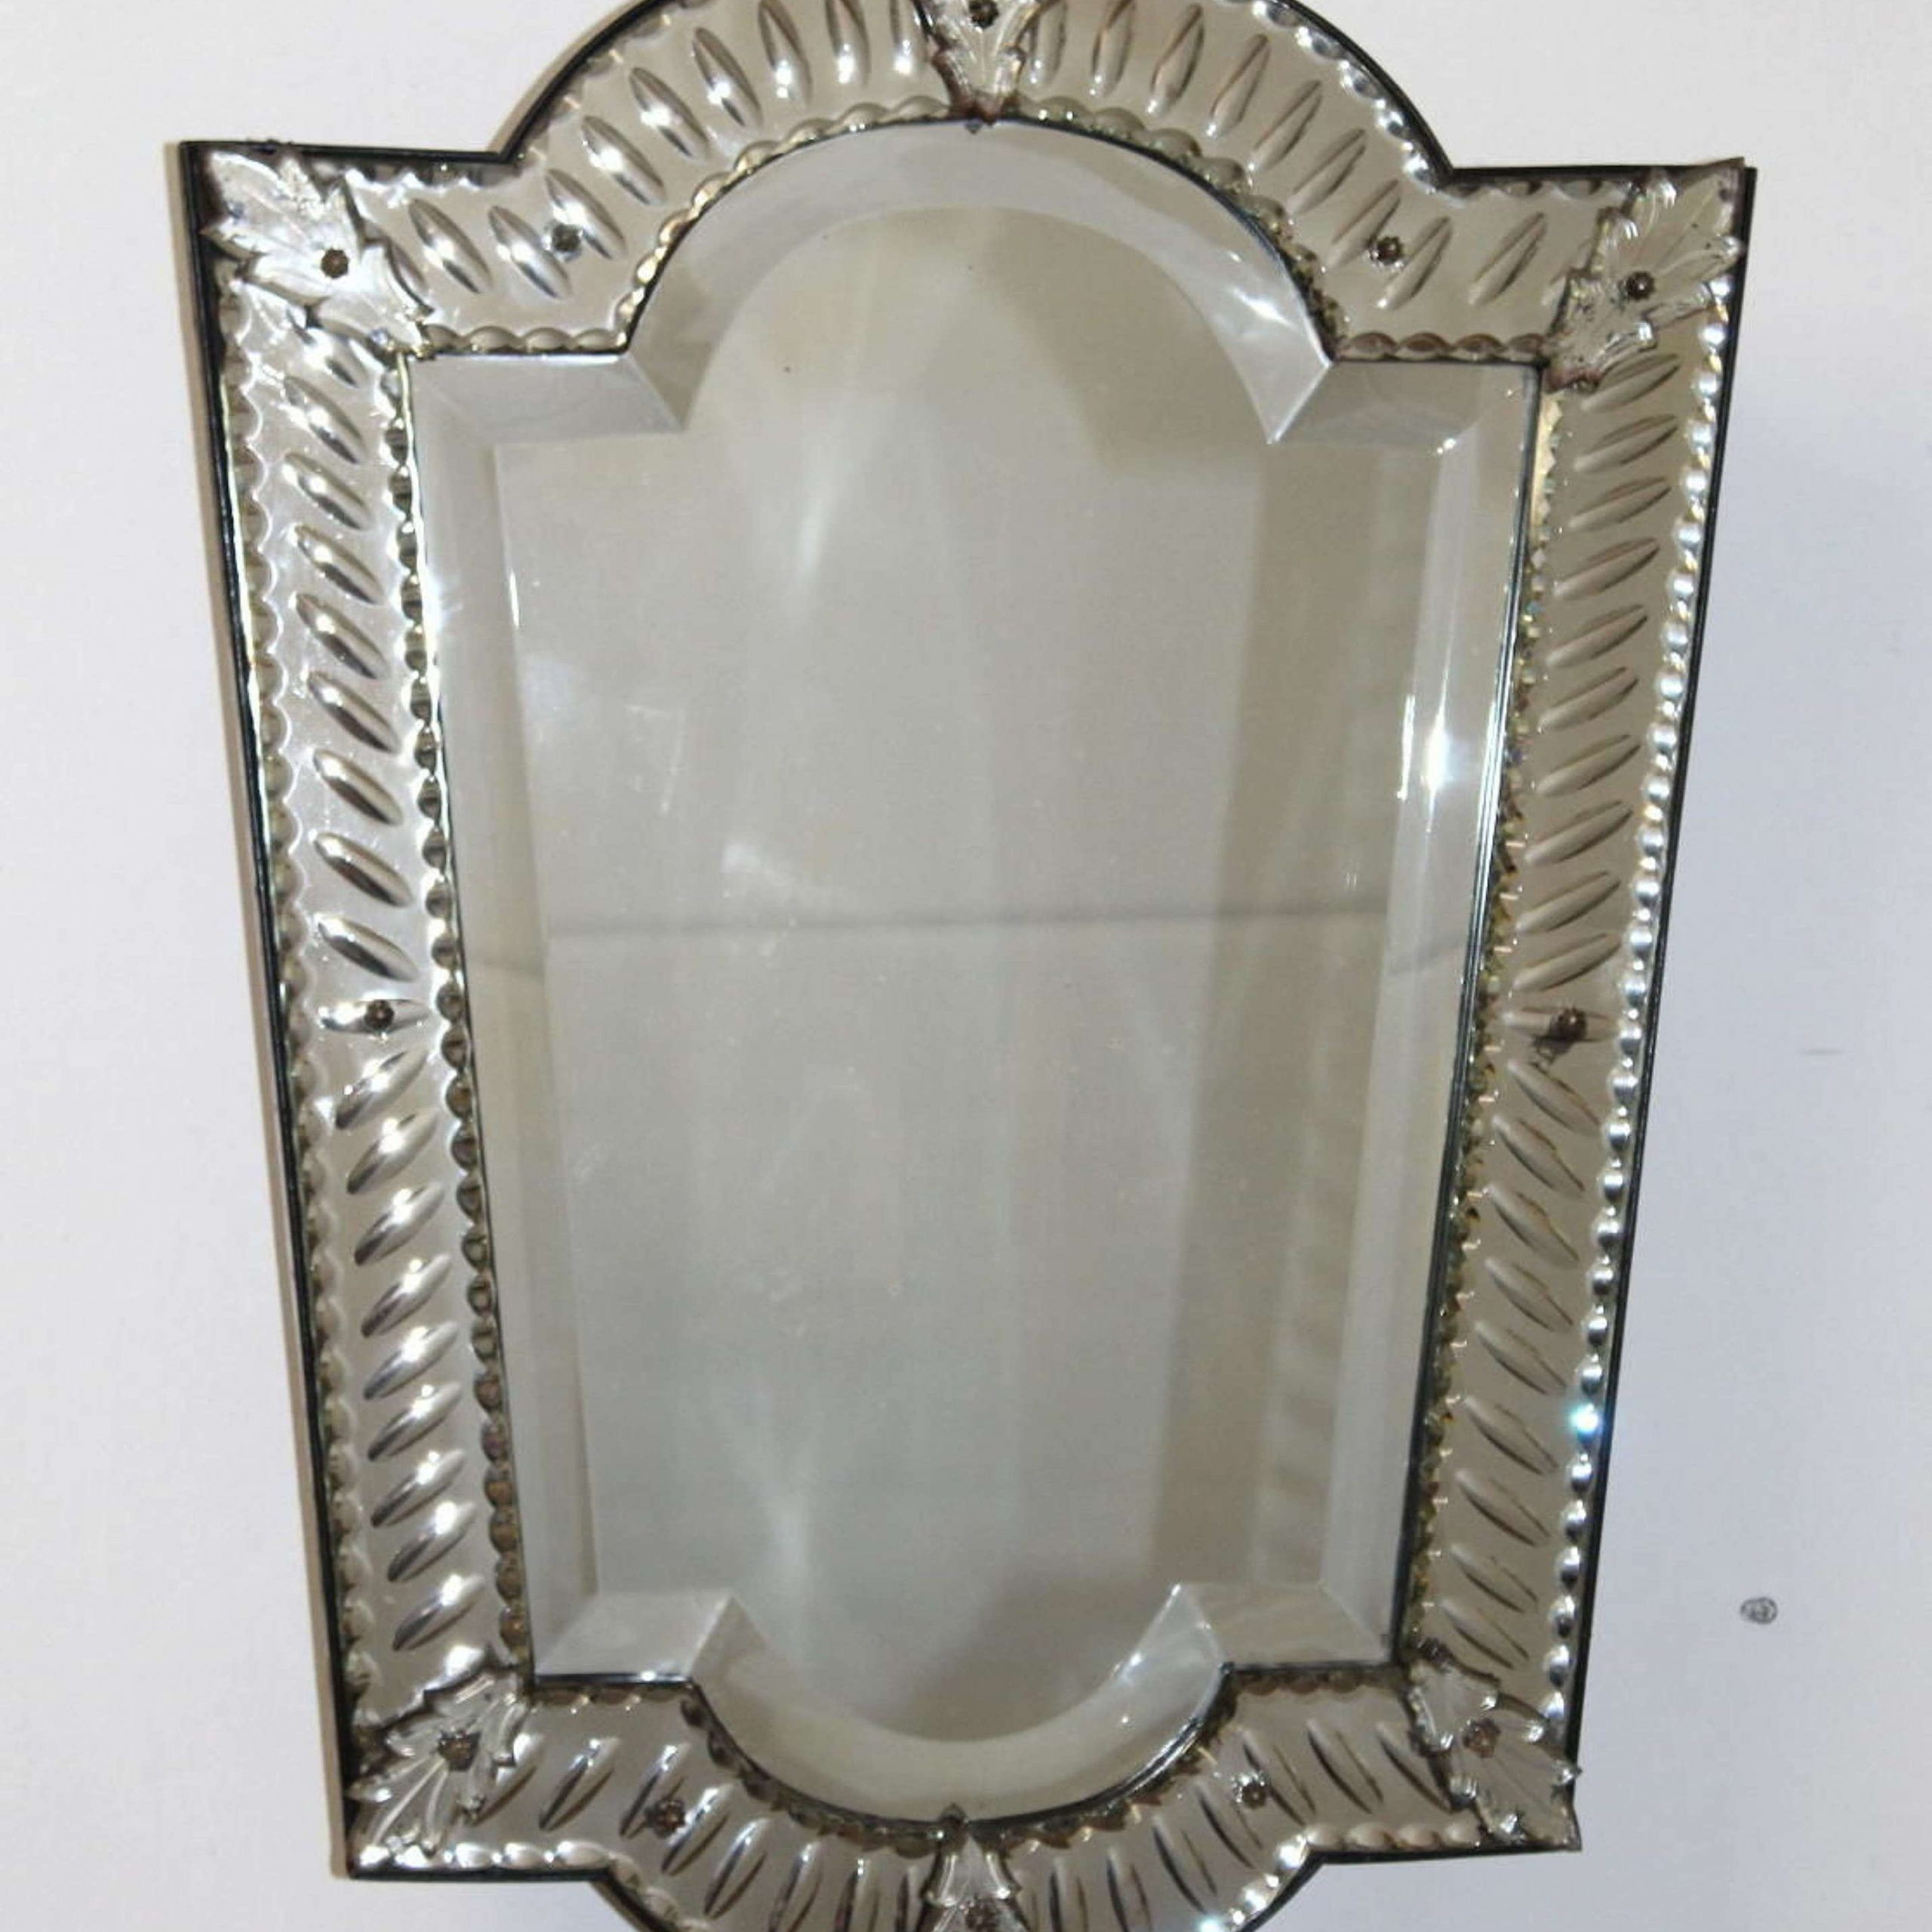 Vintage Venetian Mirror With Tapering Sides In Antique Venetian Mirrors Regarding Antique Gold Cut Edge Wall Mirrors (View 3 of 15)